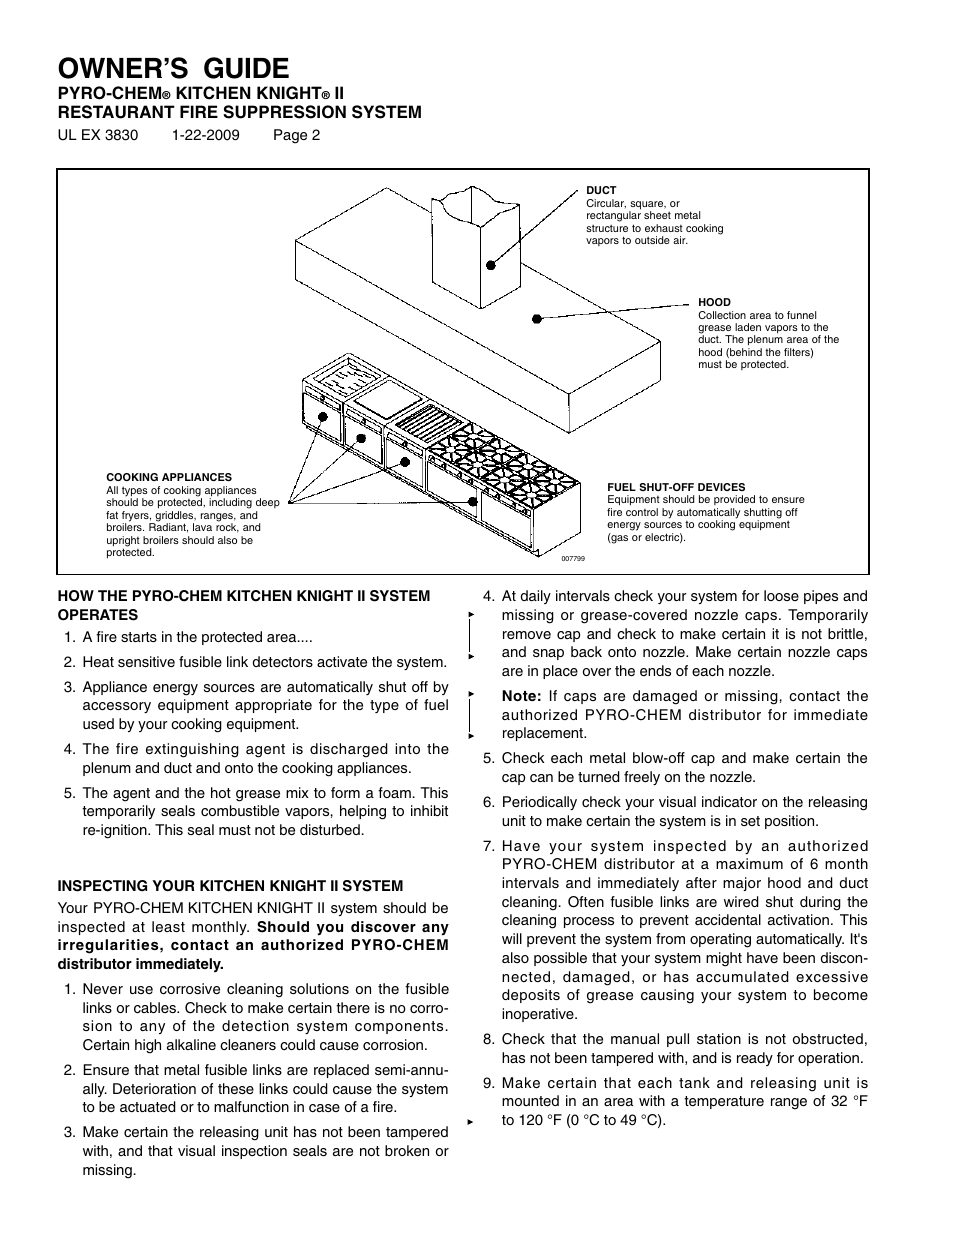 Owner’s guide PyroChem KITCHEN KNIGHT II User Manual Page 2 / 4